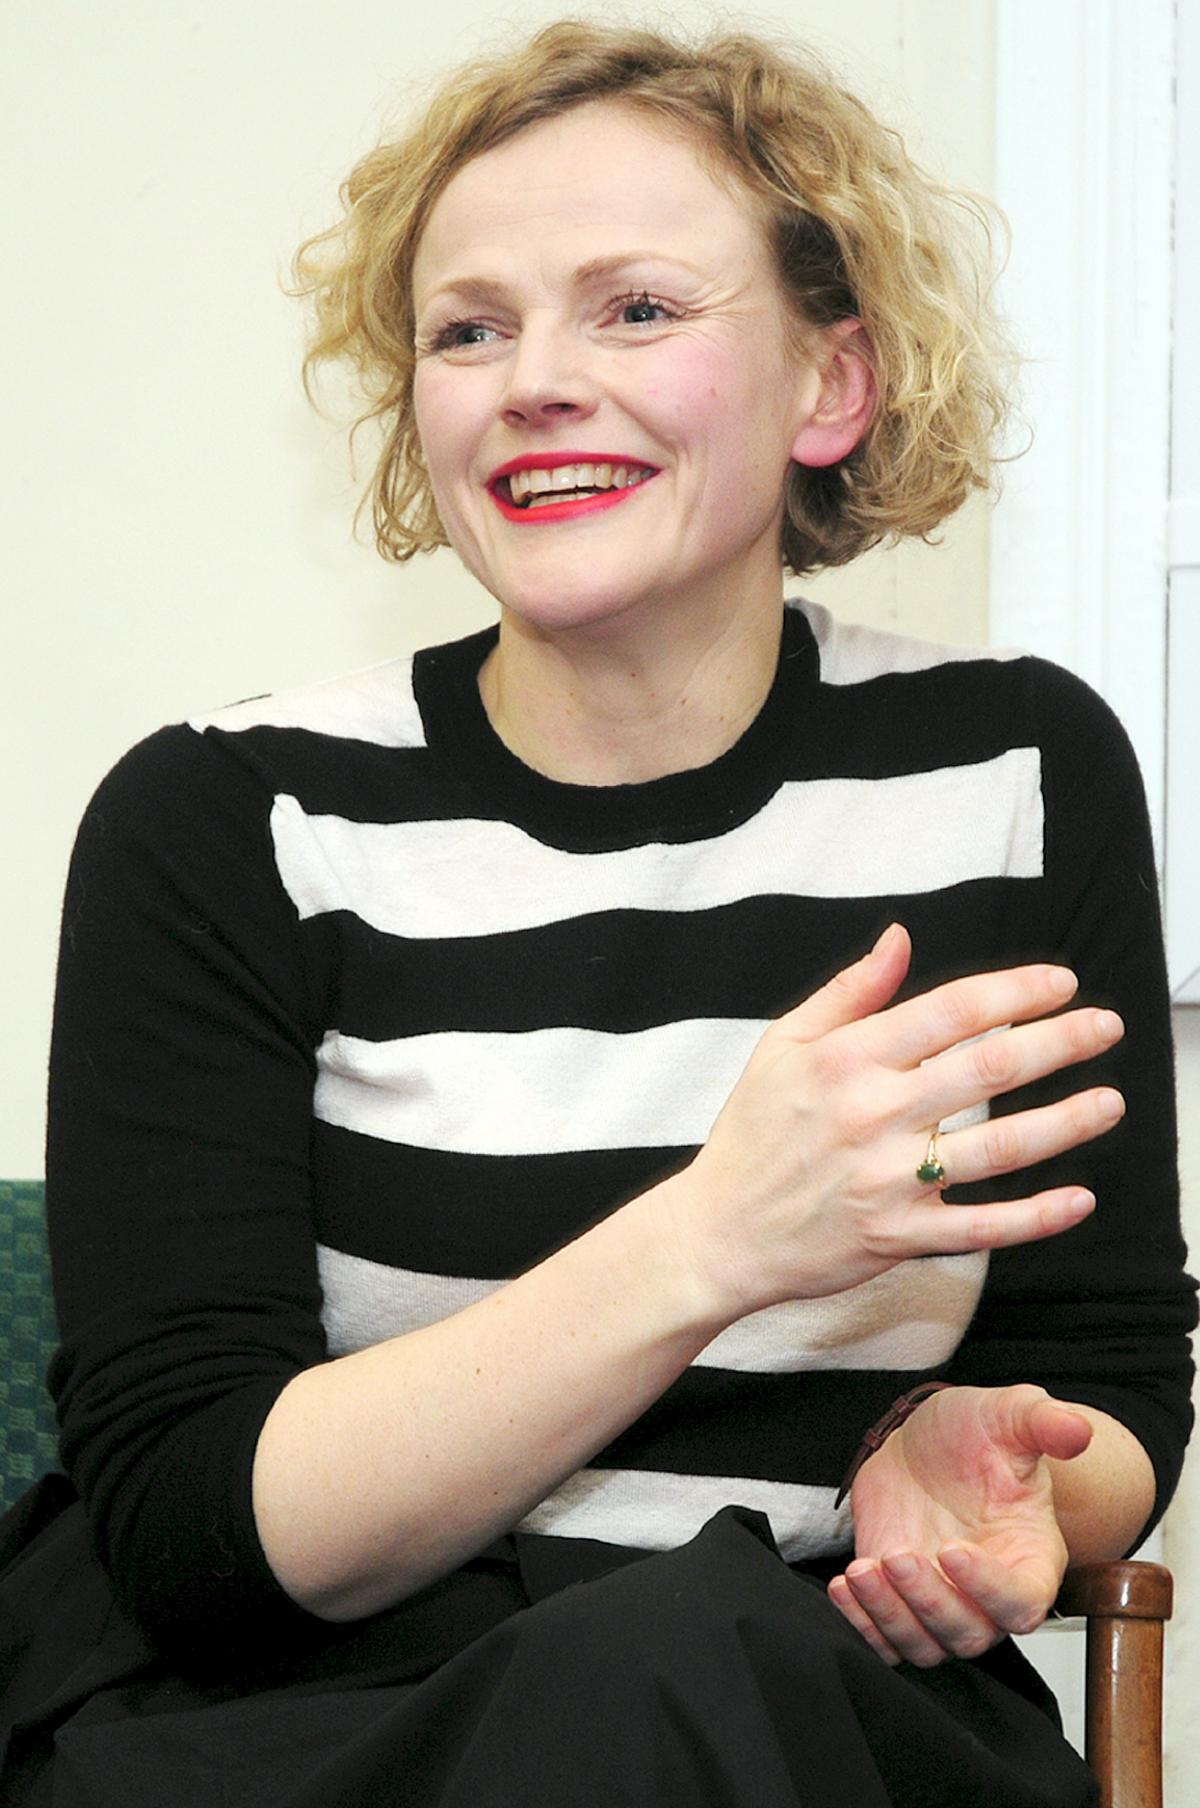 Whether she’s playing Hamlet, Myra Hindley or Veronica in Shameless, Westhoughton’s Maxine Peake is pretty splendid